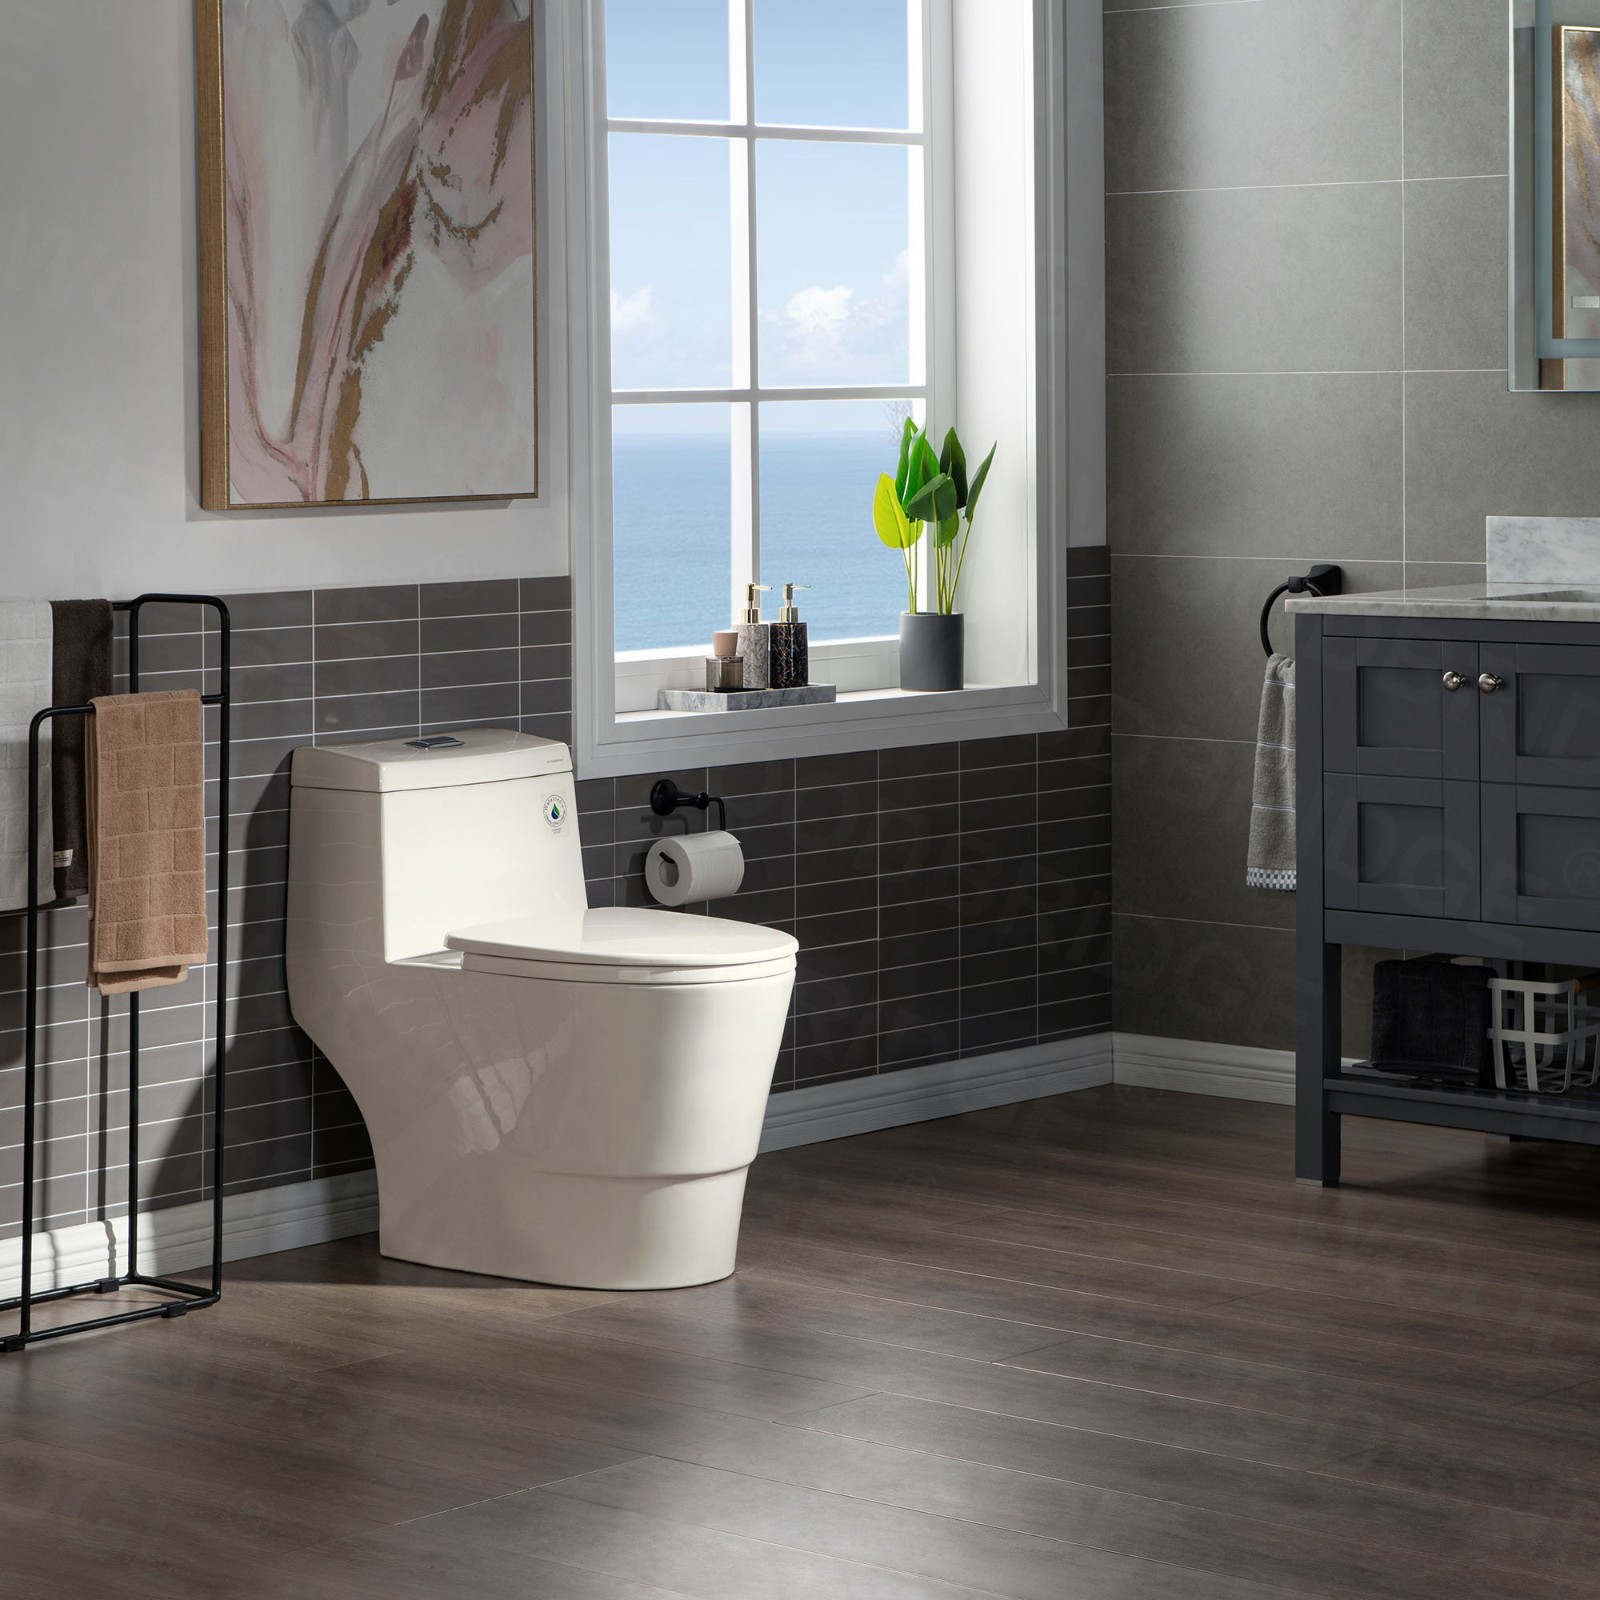  WOODBRIDGEE One Piece Toilet with Soft Closing Seat, Chair Height, 1.28 GPF Dual, Water Sensed, 1000 Gram MaP Flushing Score Toilet, B0942, Biscuit_5360